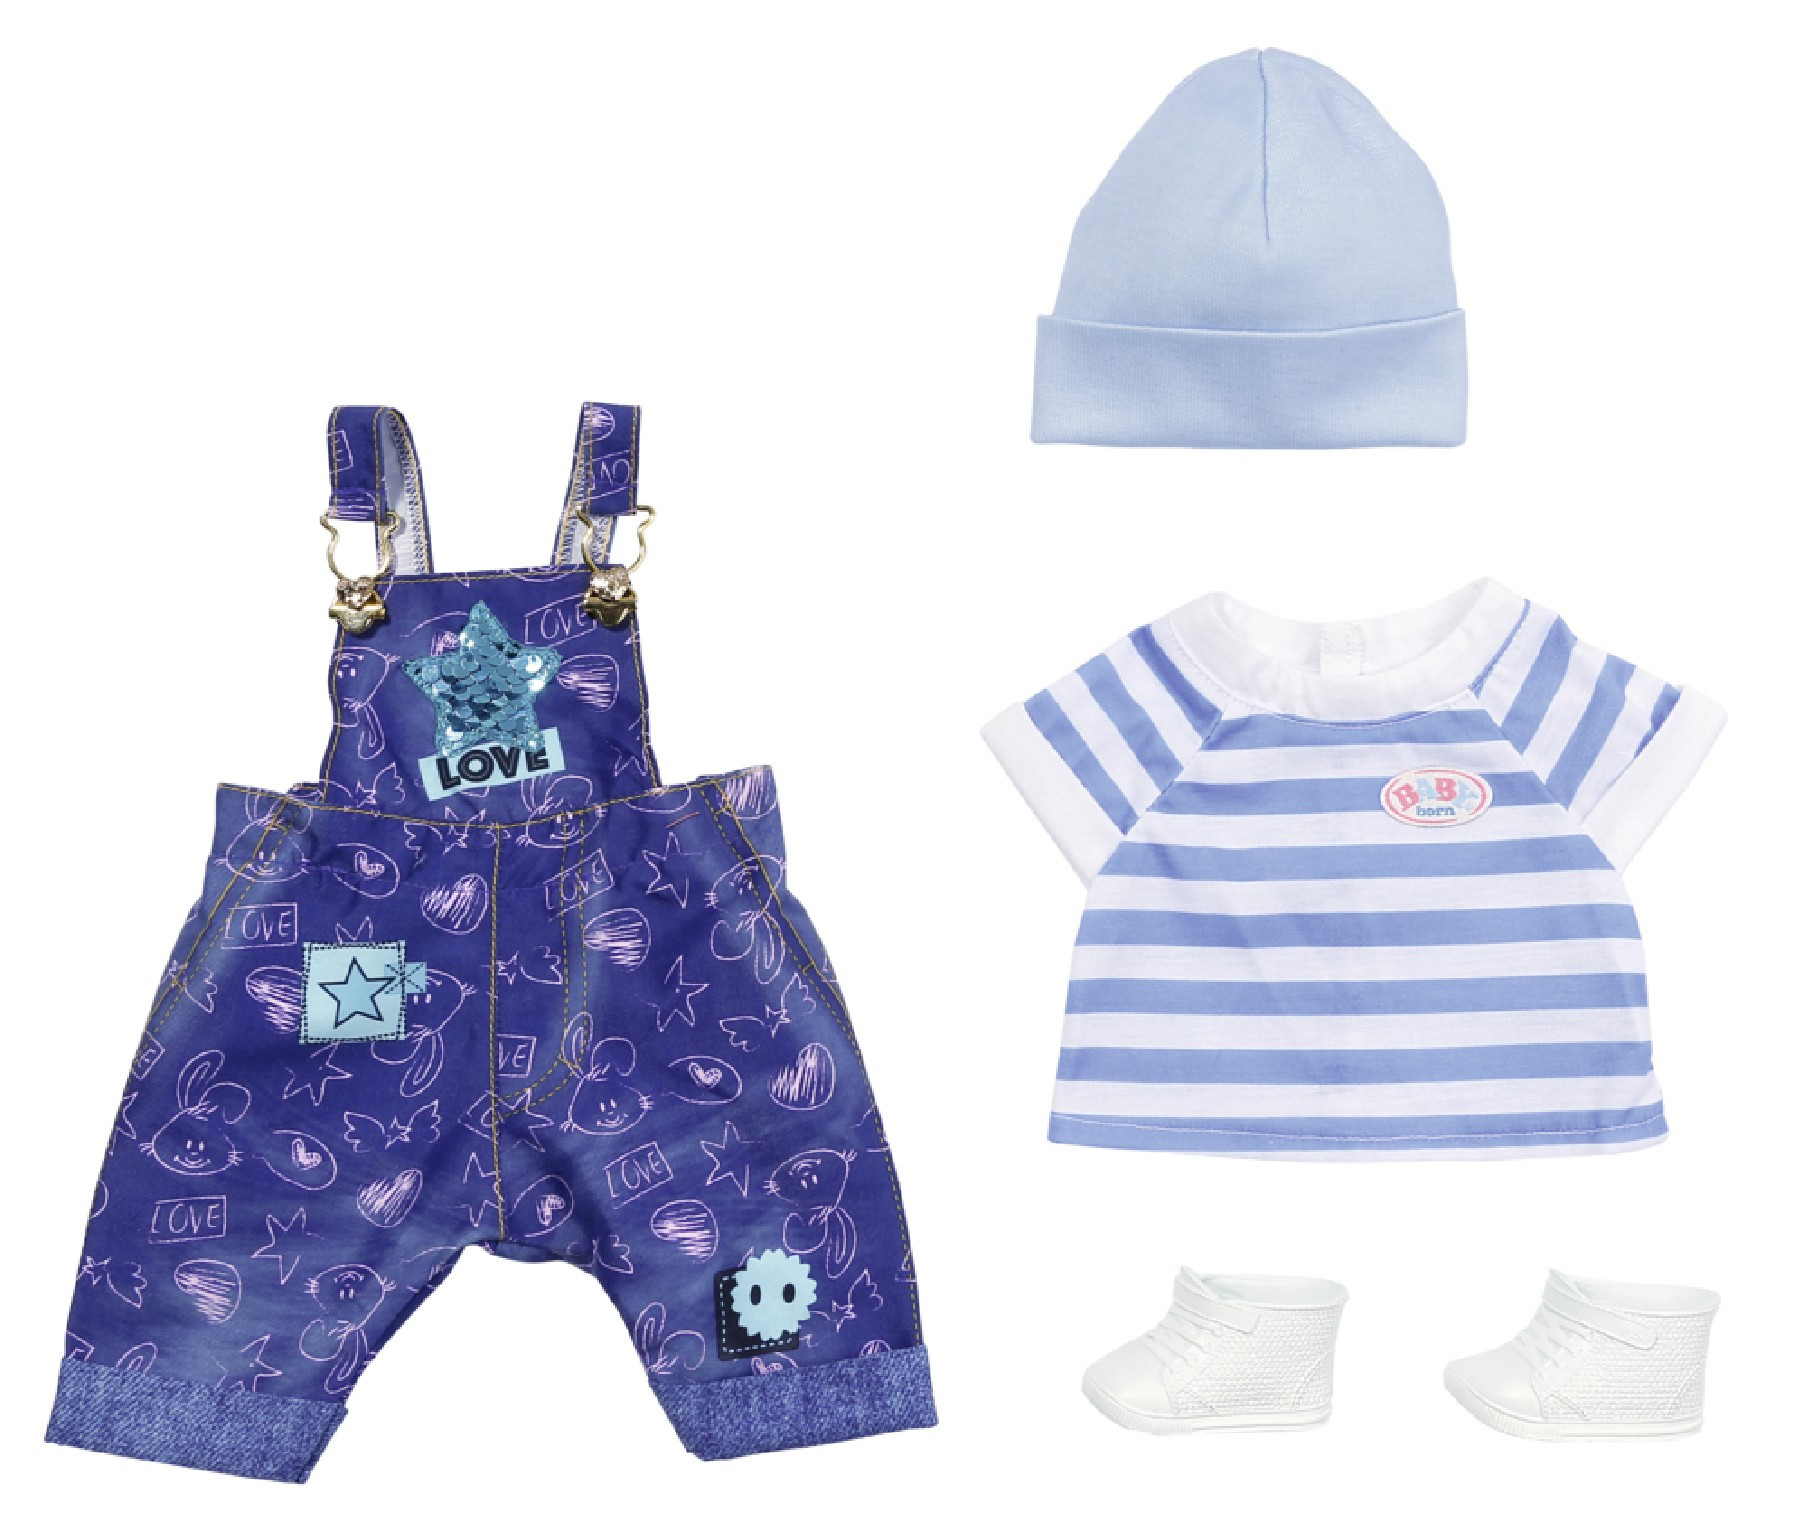 BABY born Deluxe Jeans Dungaree Set